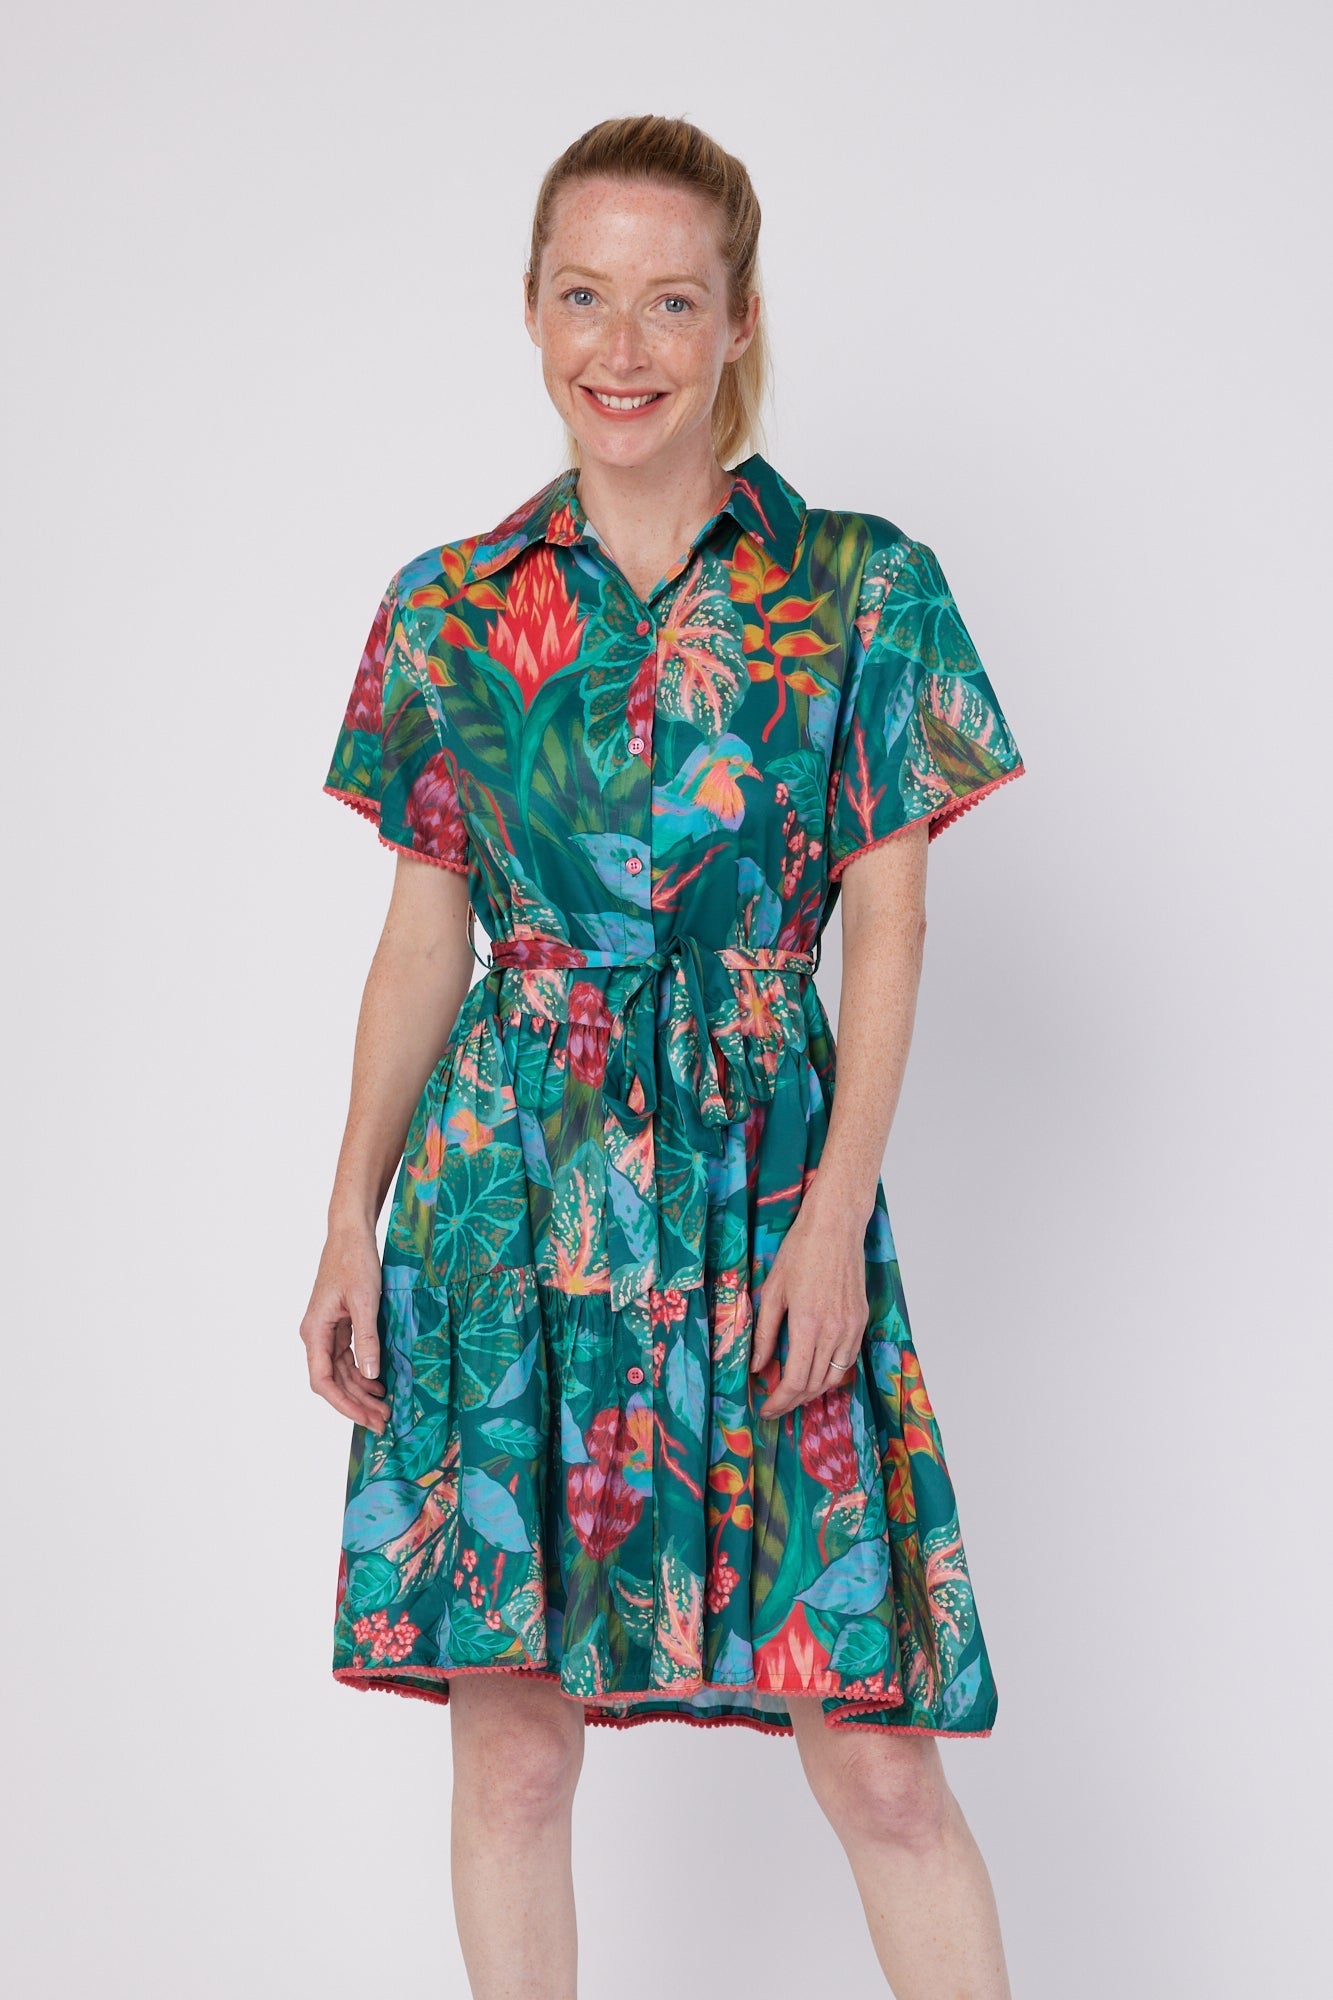 ModaPosa Alcee Short Sleeve Mini Safari Shirt Dress with Detachable Belt in Tropical Canopy . Discover women's resort dresses and lifestyle clothing inspired by the Mediterranean. Free worldwide shipping available!